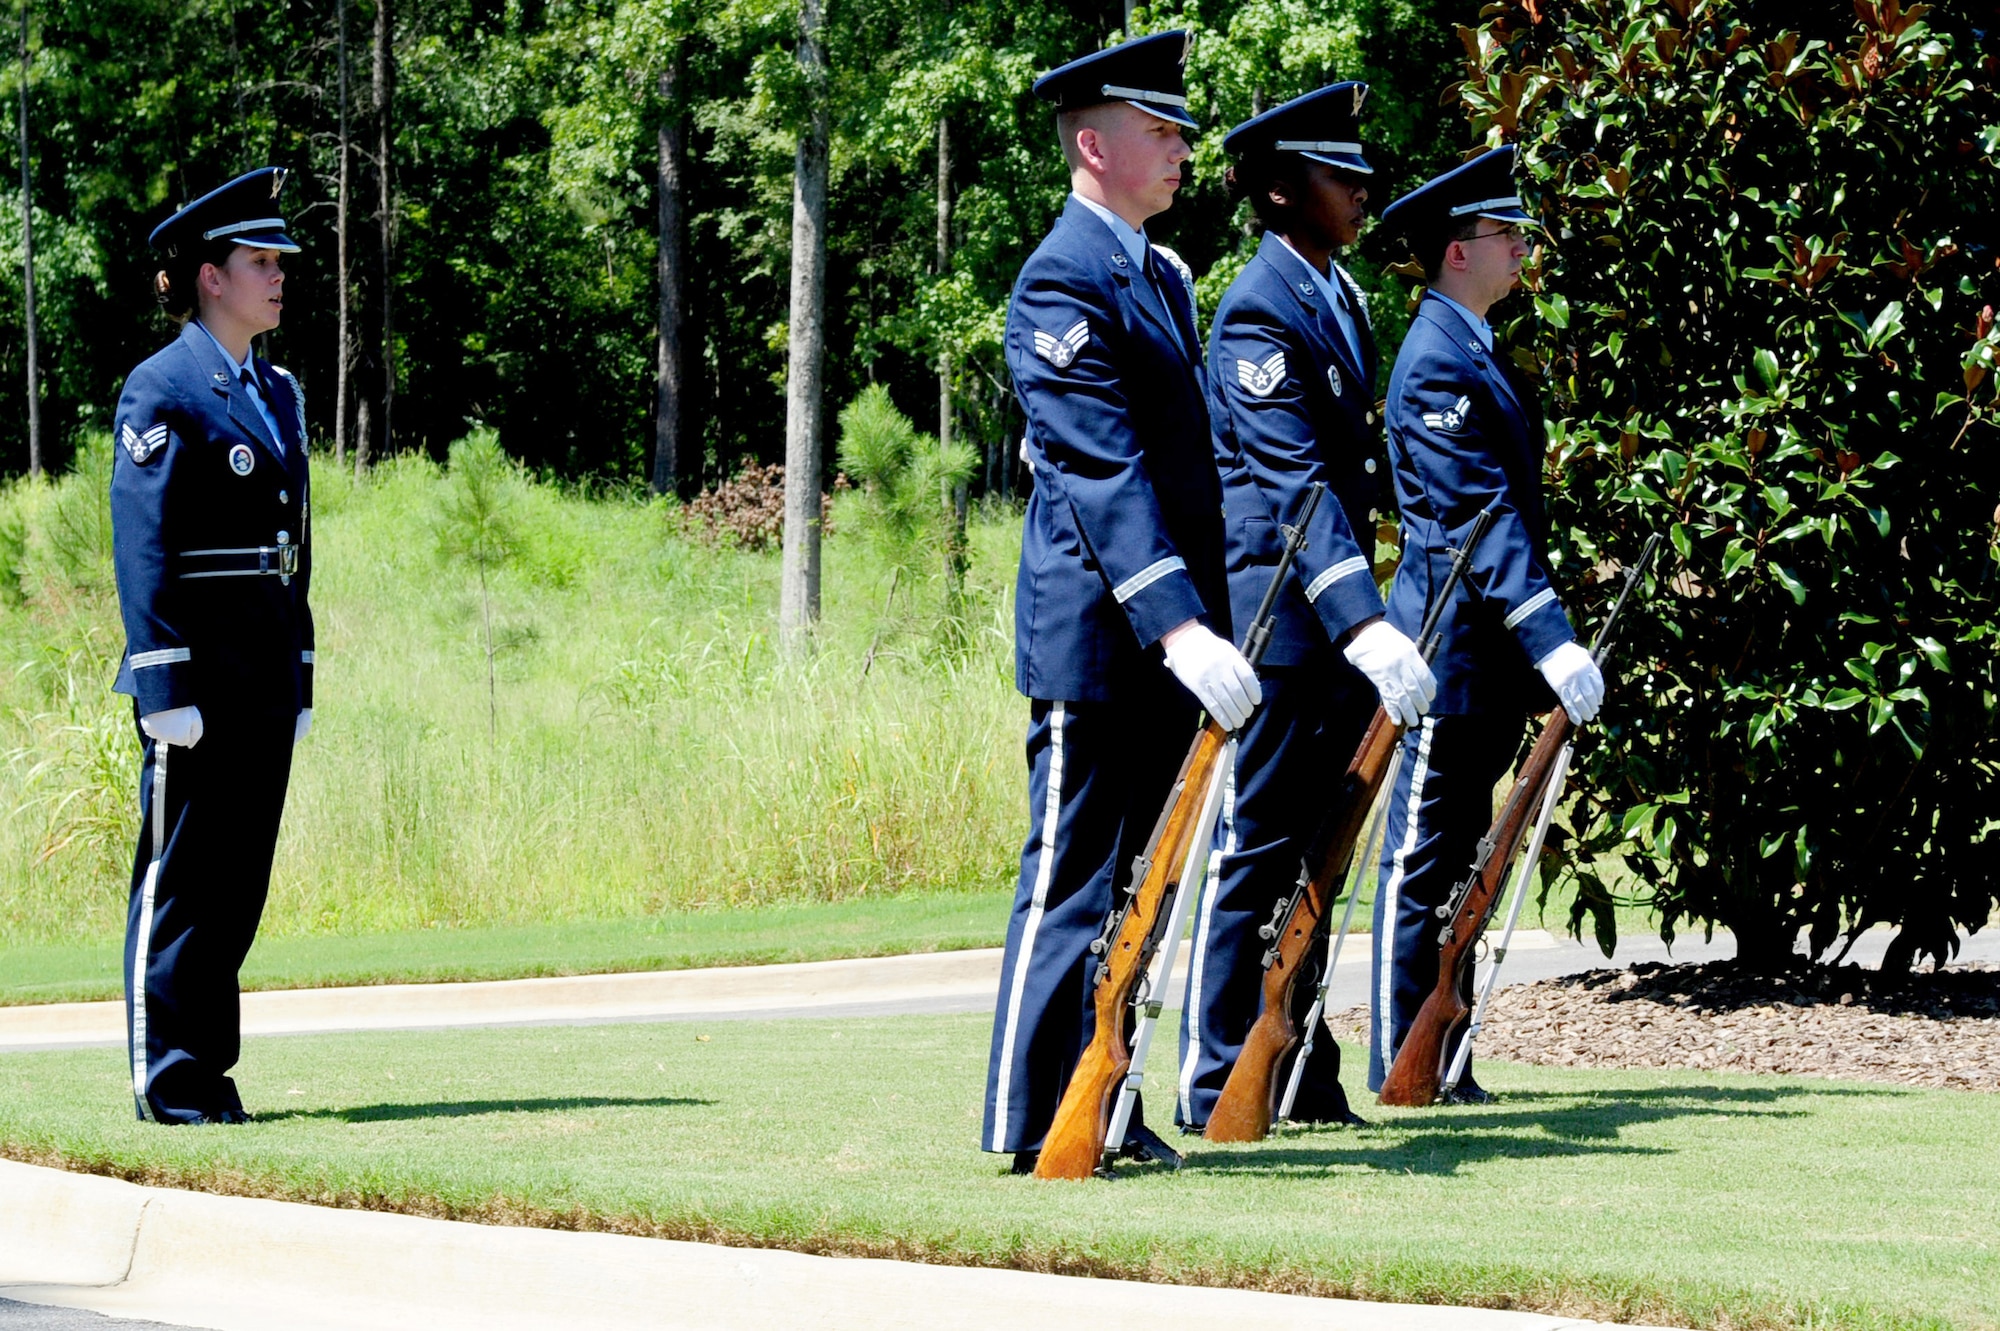 Members of the Maxwell Air Force Base Honor Guard perform a memorial ceremony held Aug. 22, 2012 at the Alabama National Cemetary in Montevello, Ala. (U.S. Air Force by Master Sgt. Michael Voss)